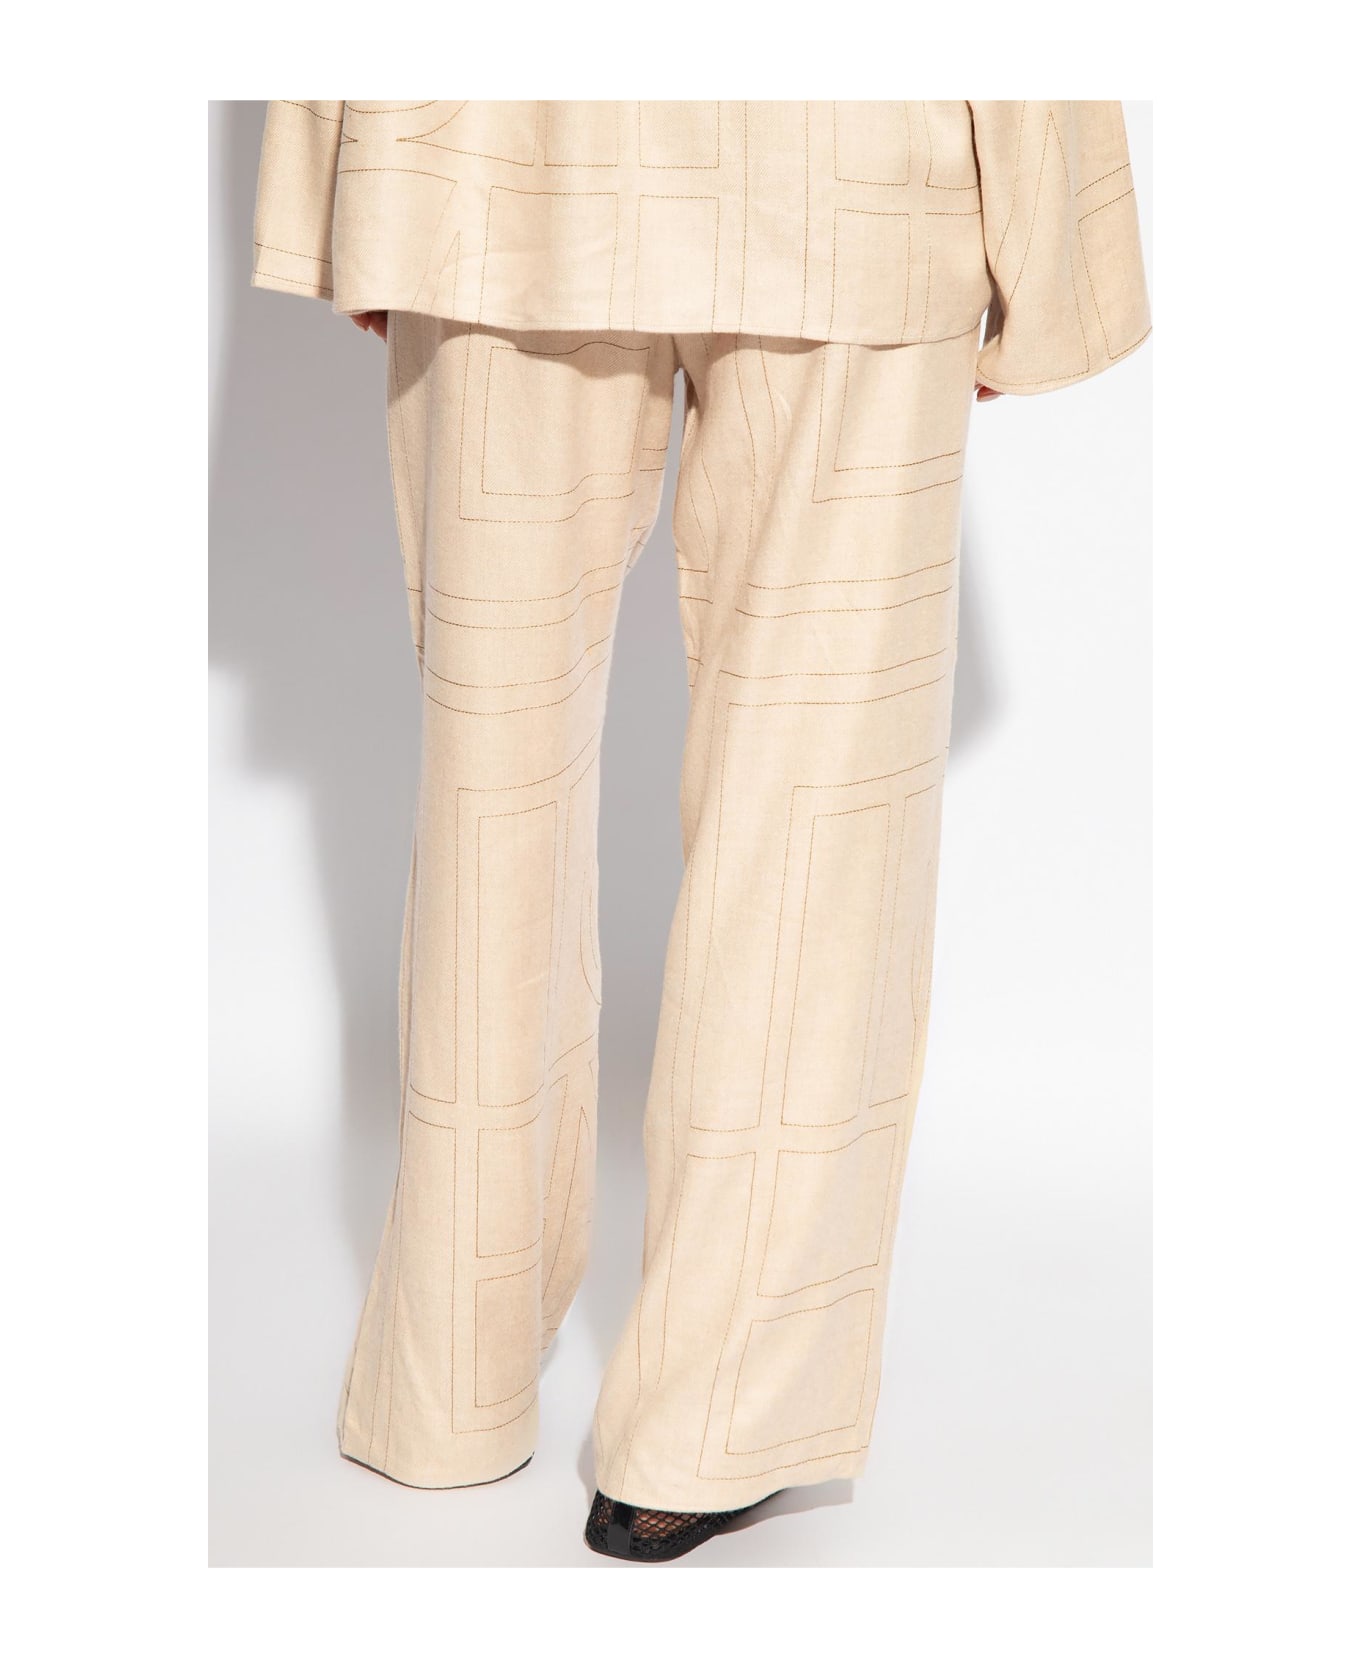 Totême Toteme Trousers With Monogram - IVORY